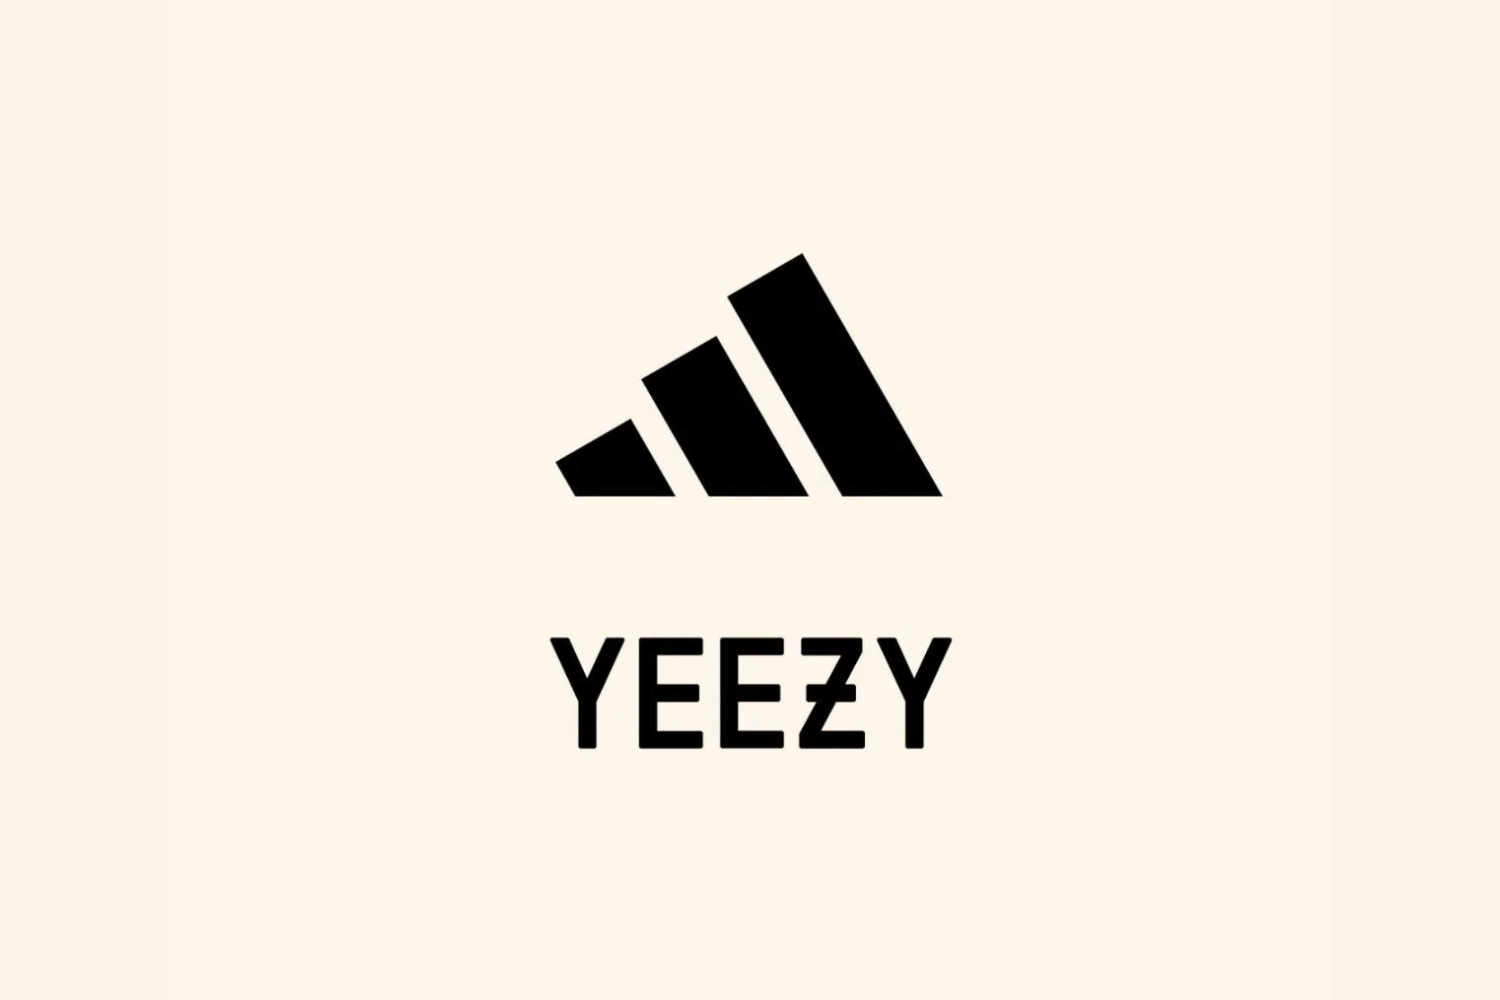 CEO Bjørn Gulden confirms that adidas will no longer sell YEEZY